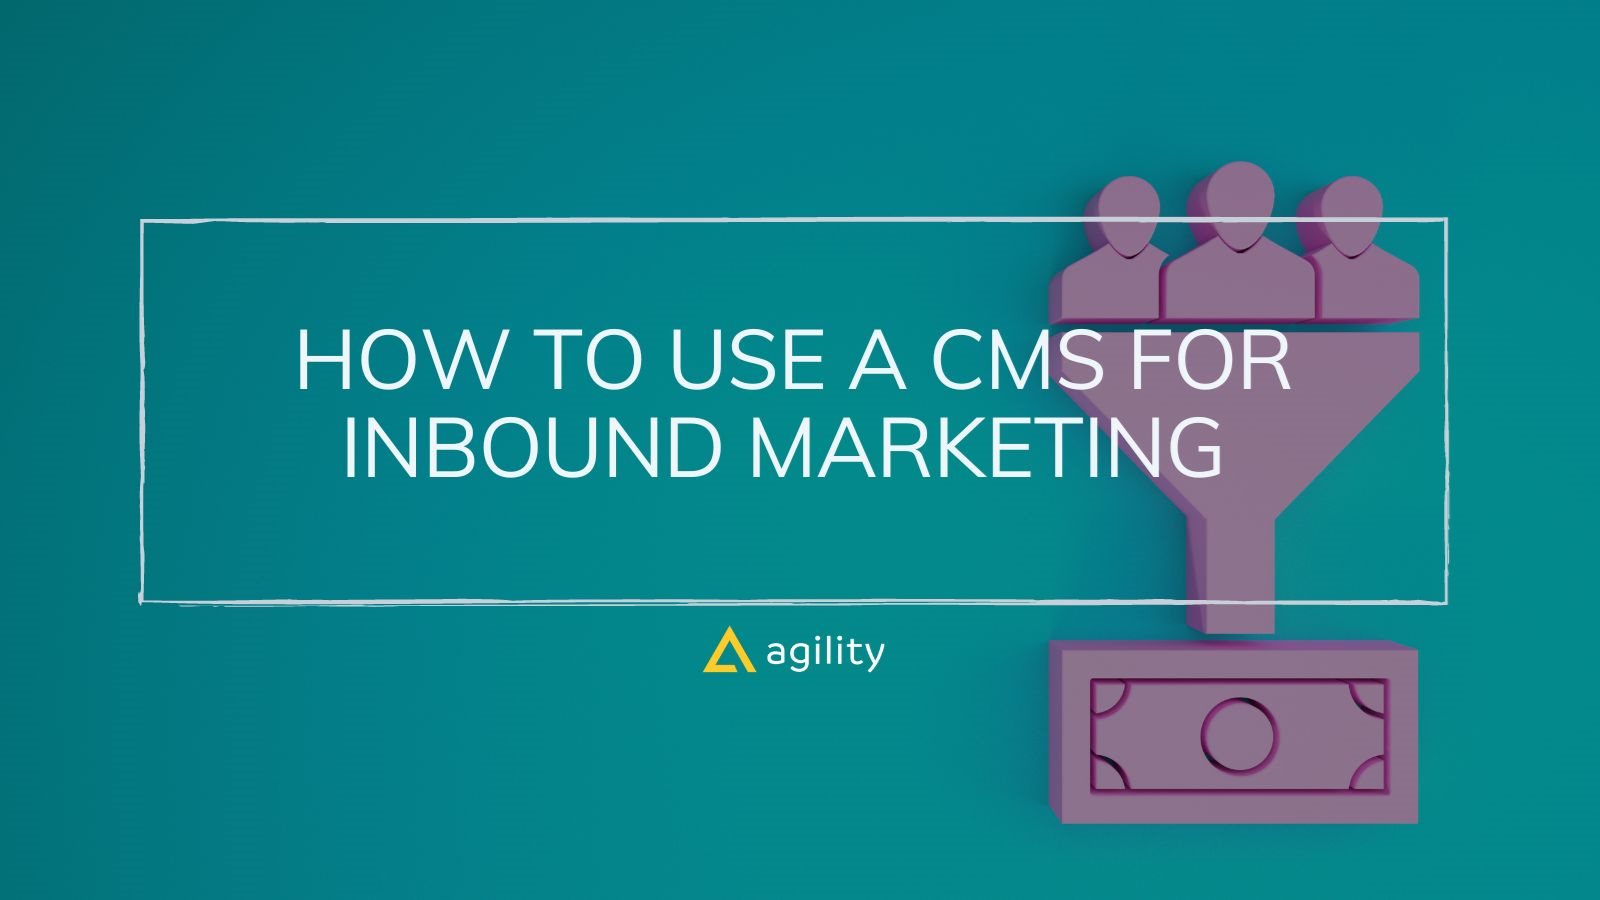 How To Use A CMS For Inbound Marketing